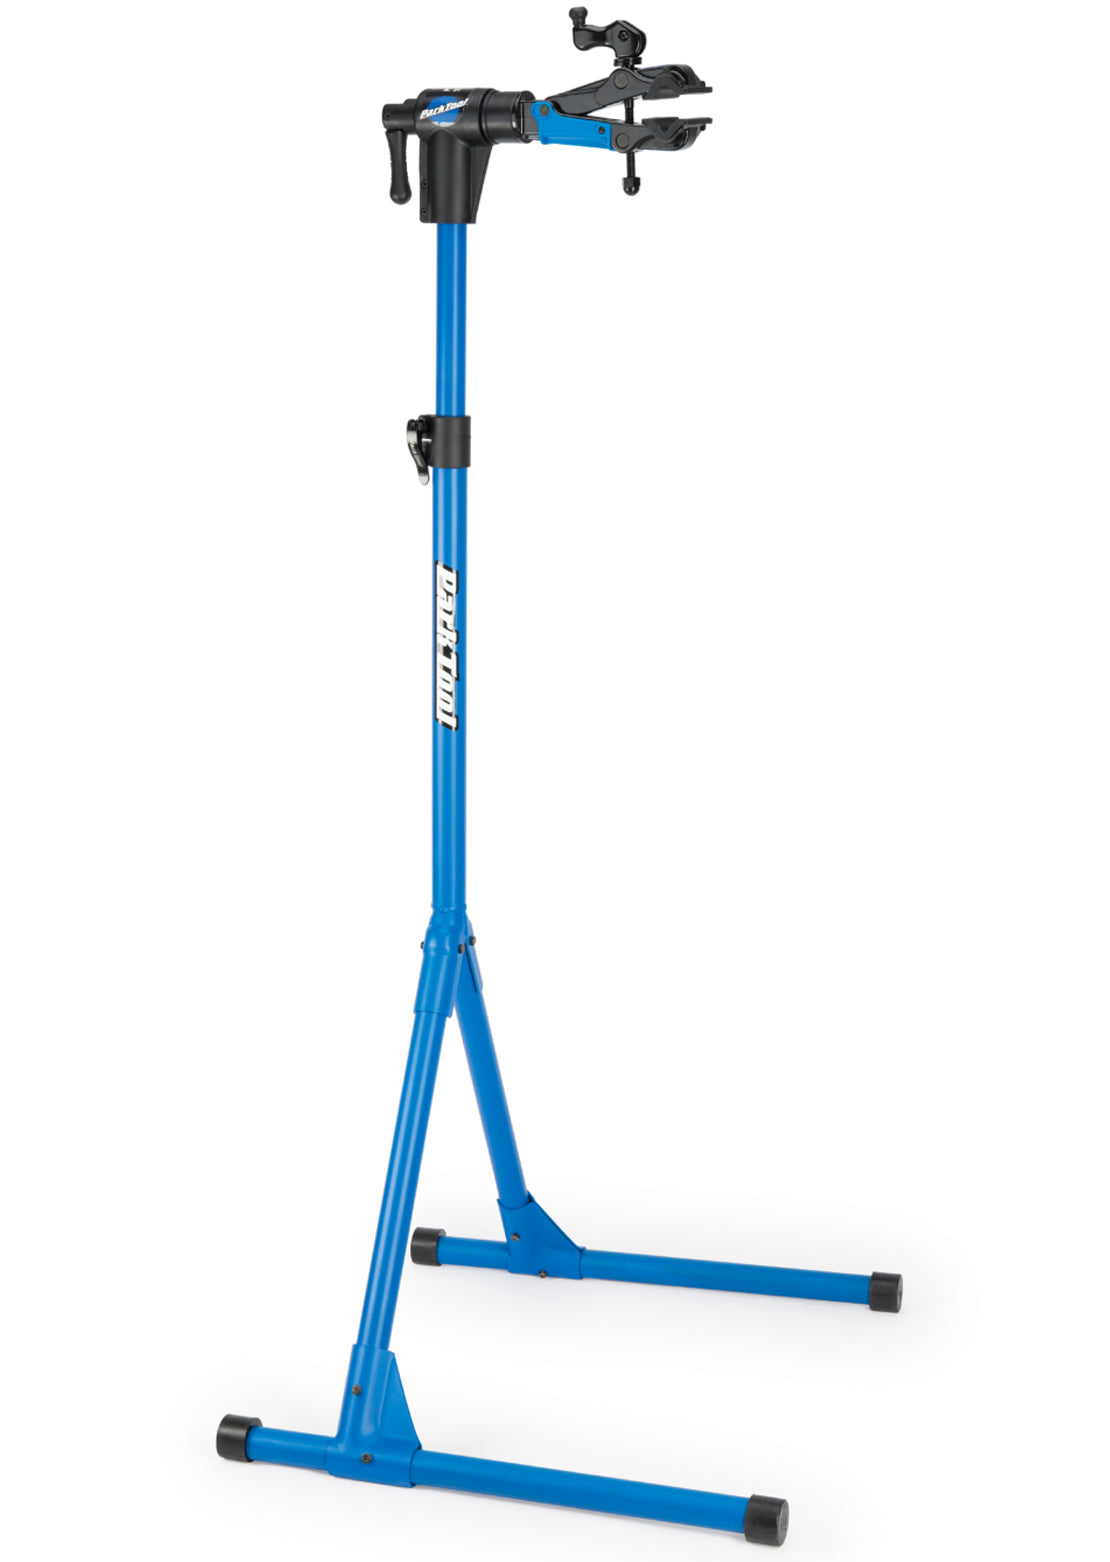 Park Tool PCS-4-2 Deluxe Home Mechanic Repair Stand Blue